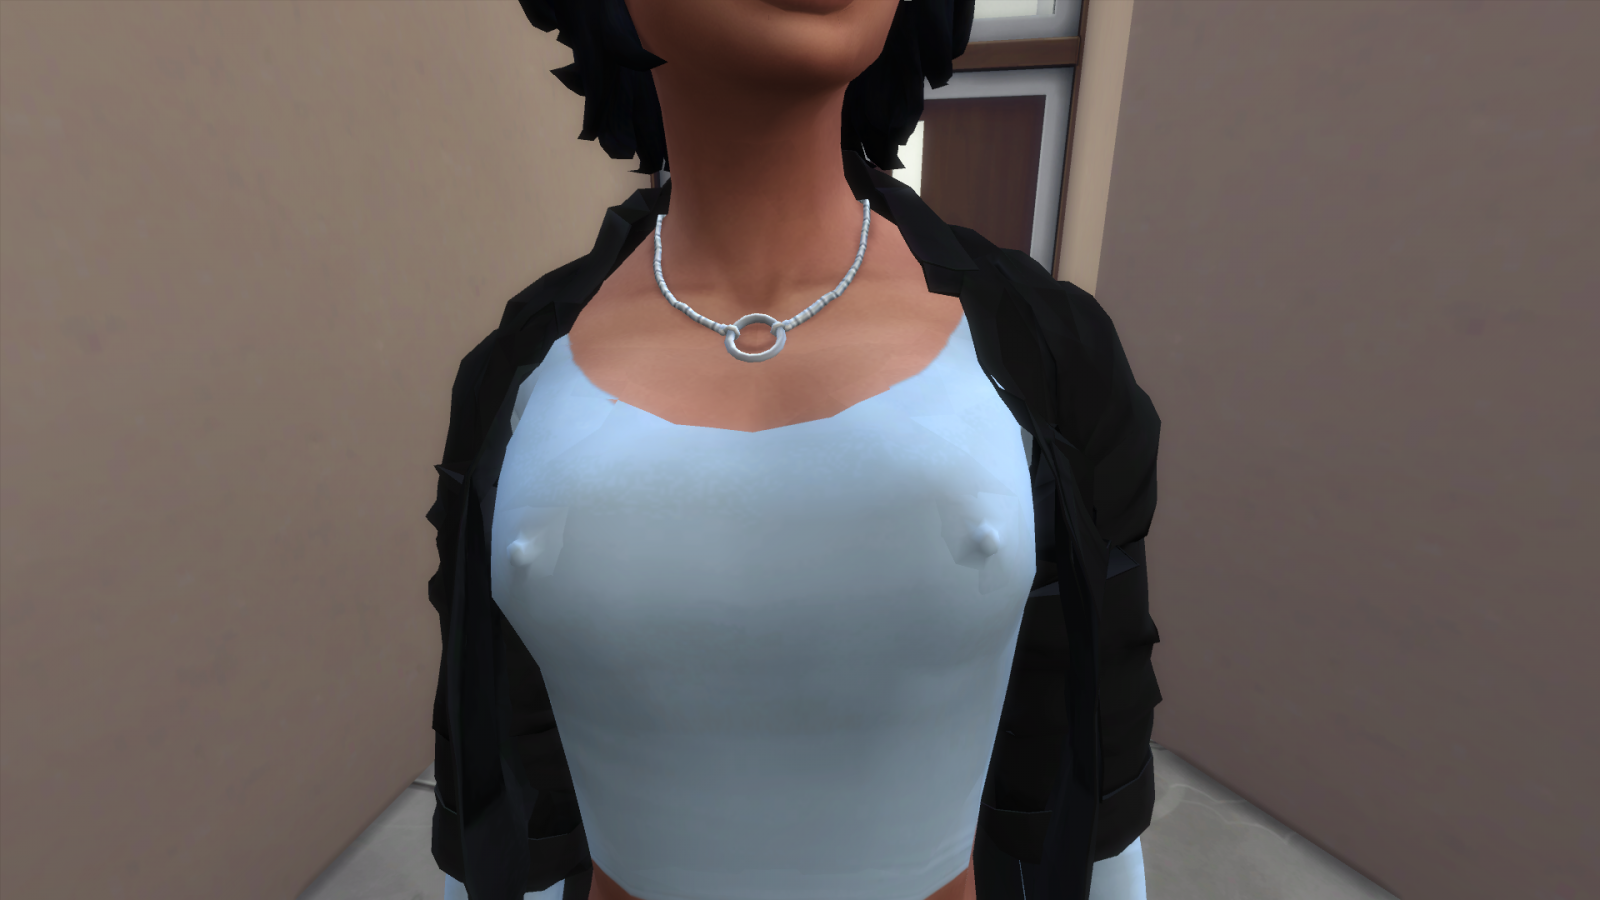 Sims 4 Pokies Accessory For Females V2 Downloads The Sims 4 Loverslab